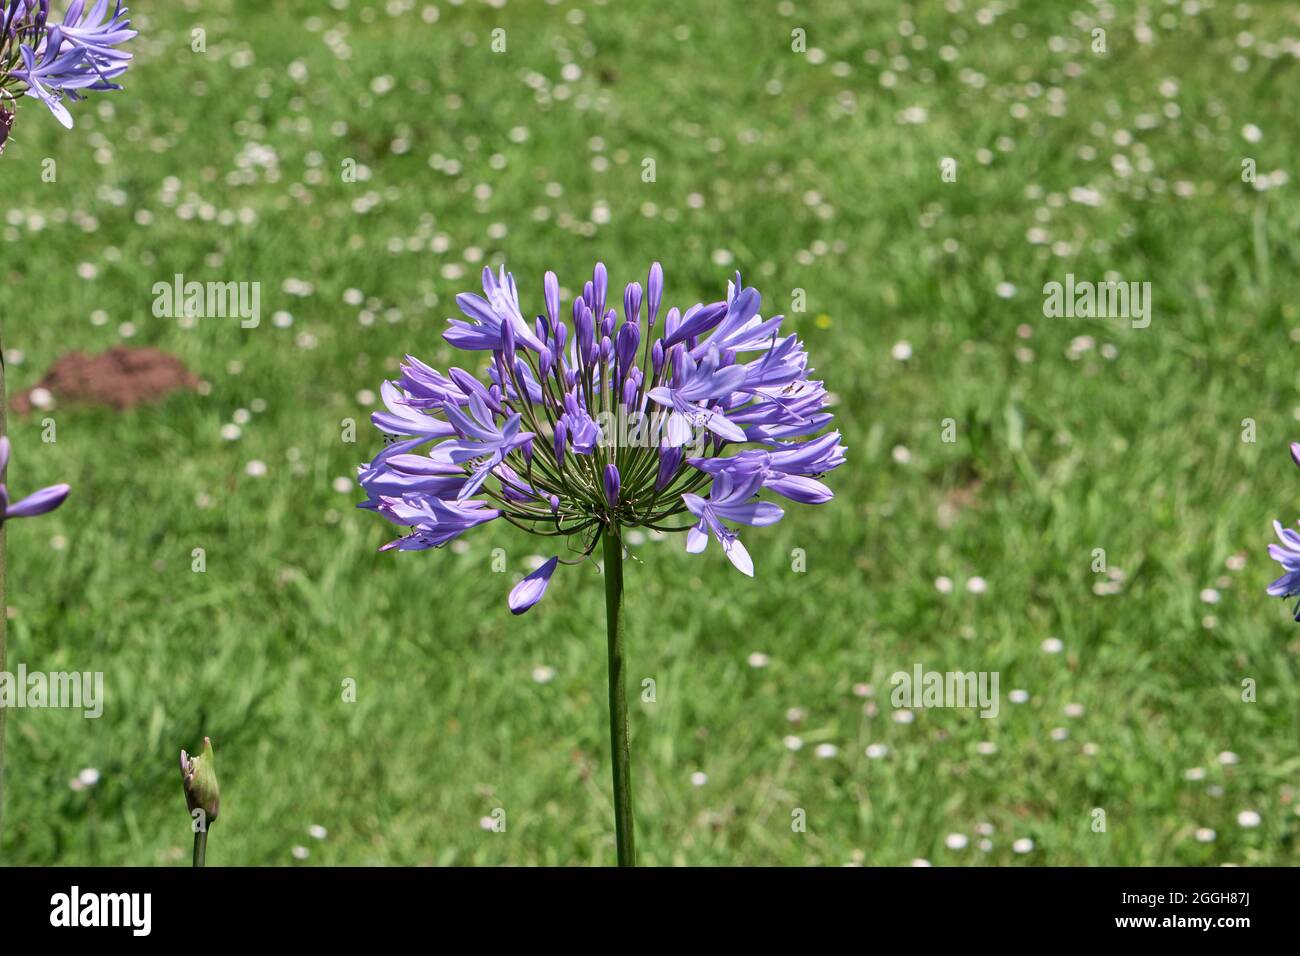 Agapanthus praecox blue lily flower blooming Stock Photo